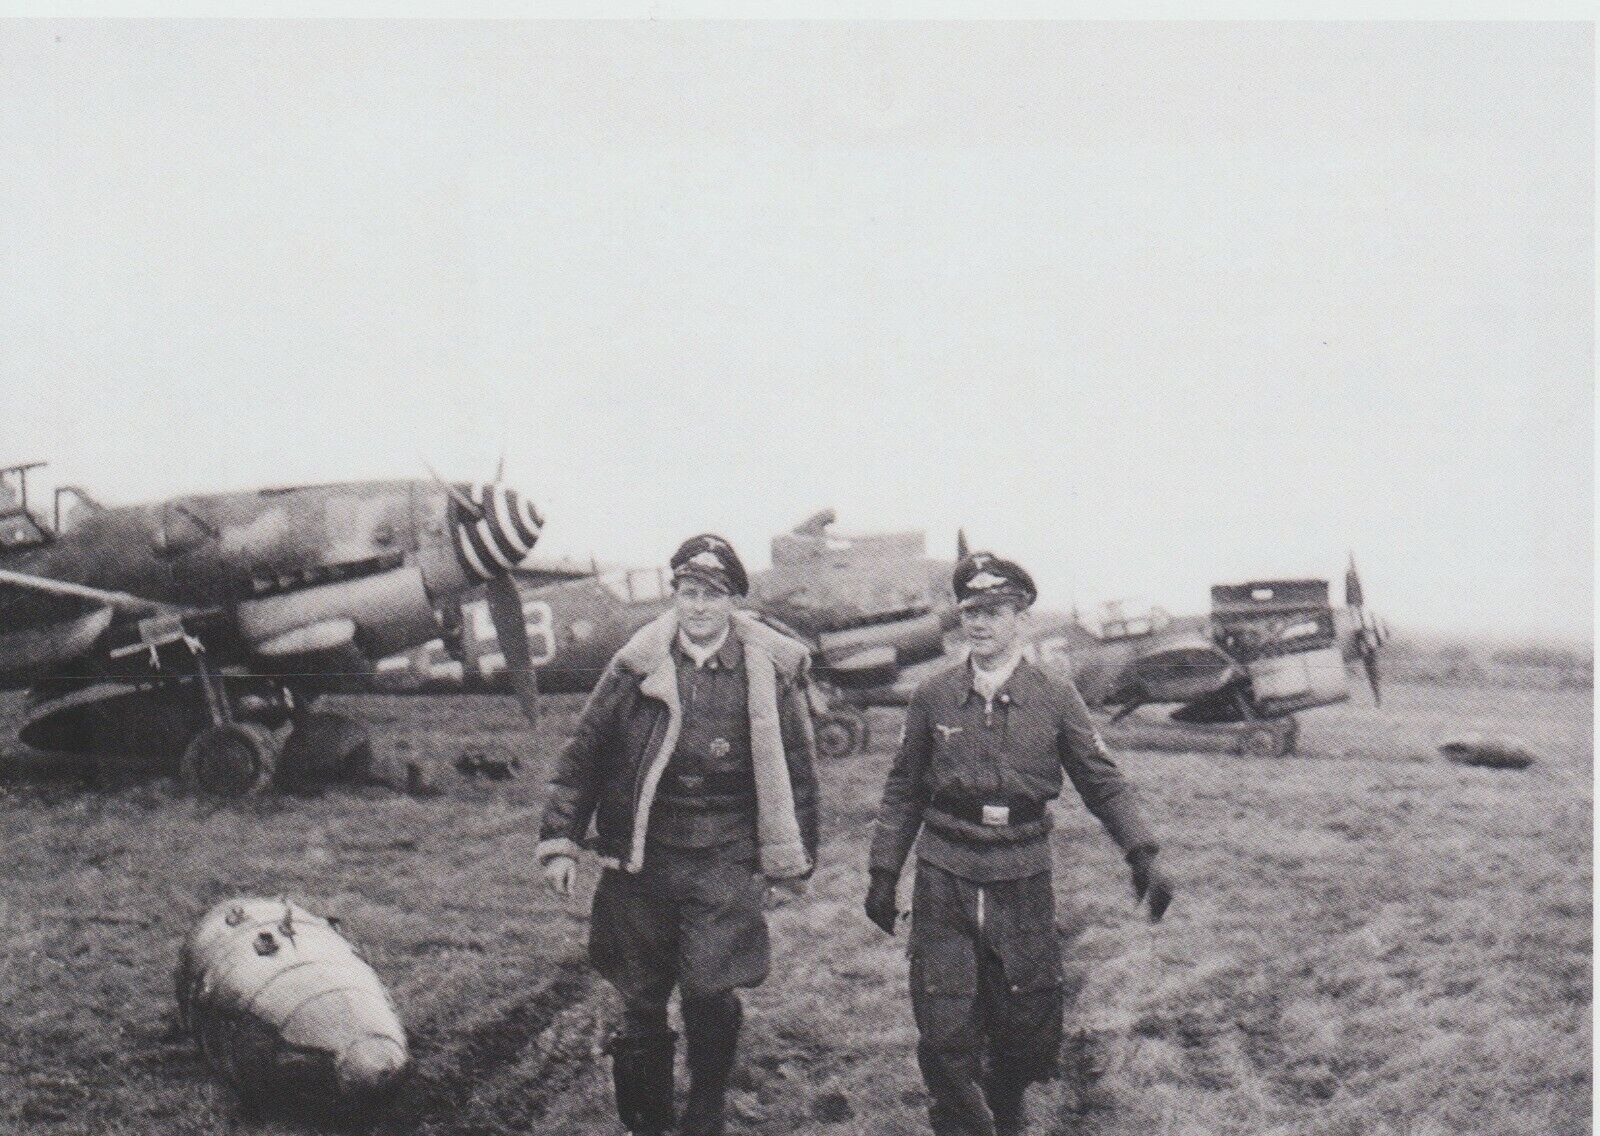 OFw Muller and Fw Blume of Luftwaffe 4/JG27 with their BF109G-6s WW2 4x6**